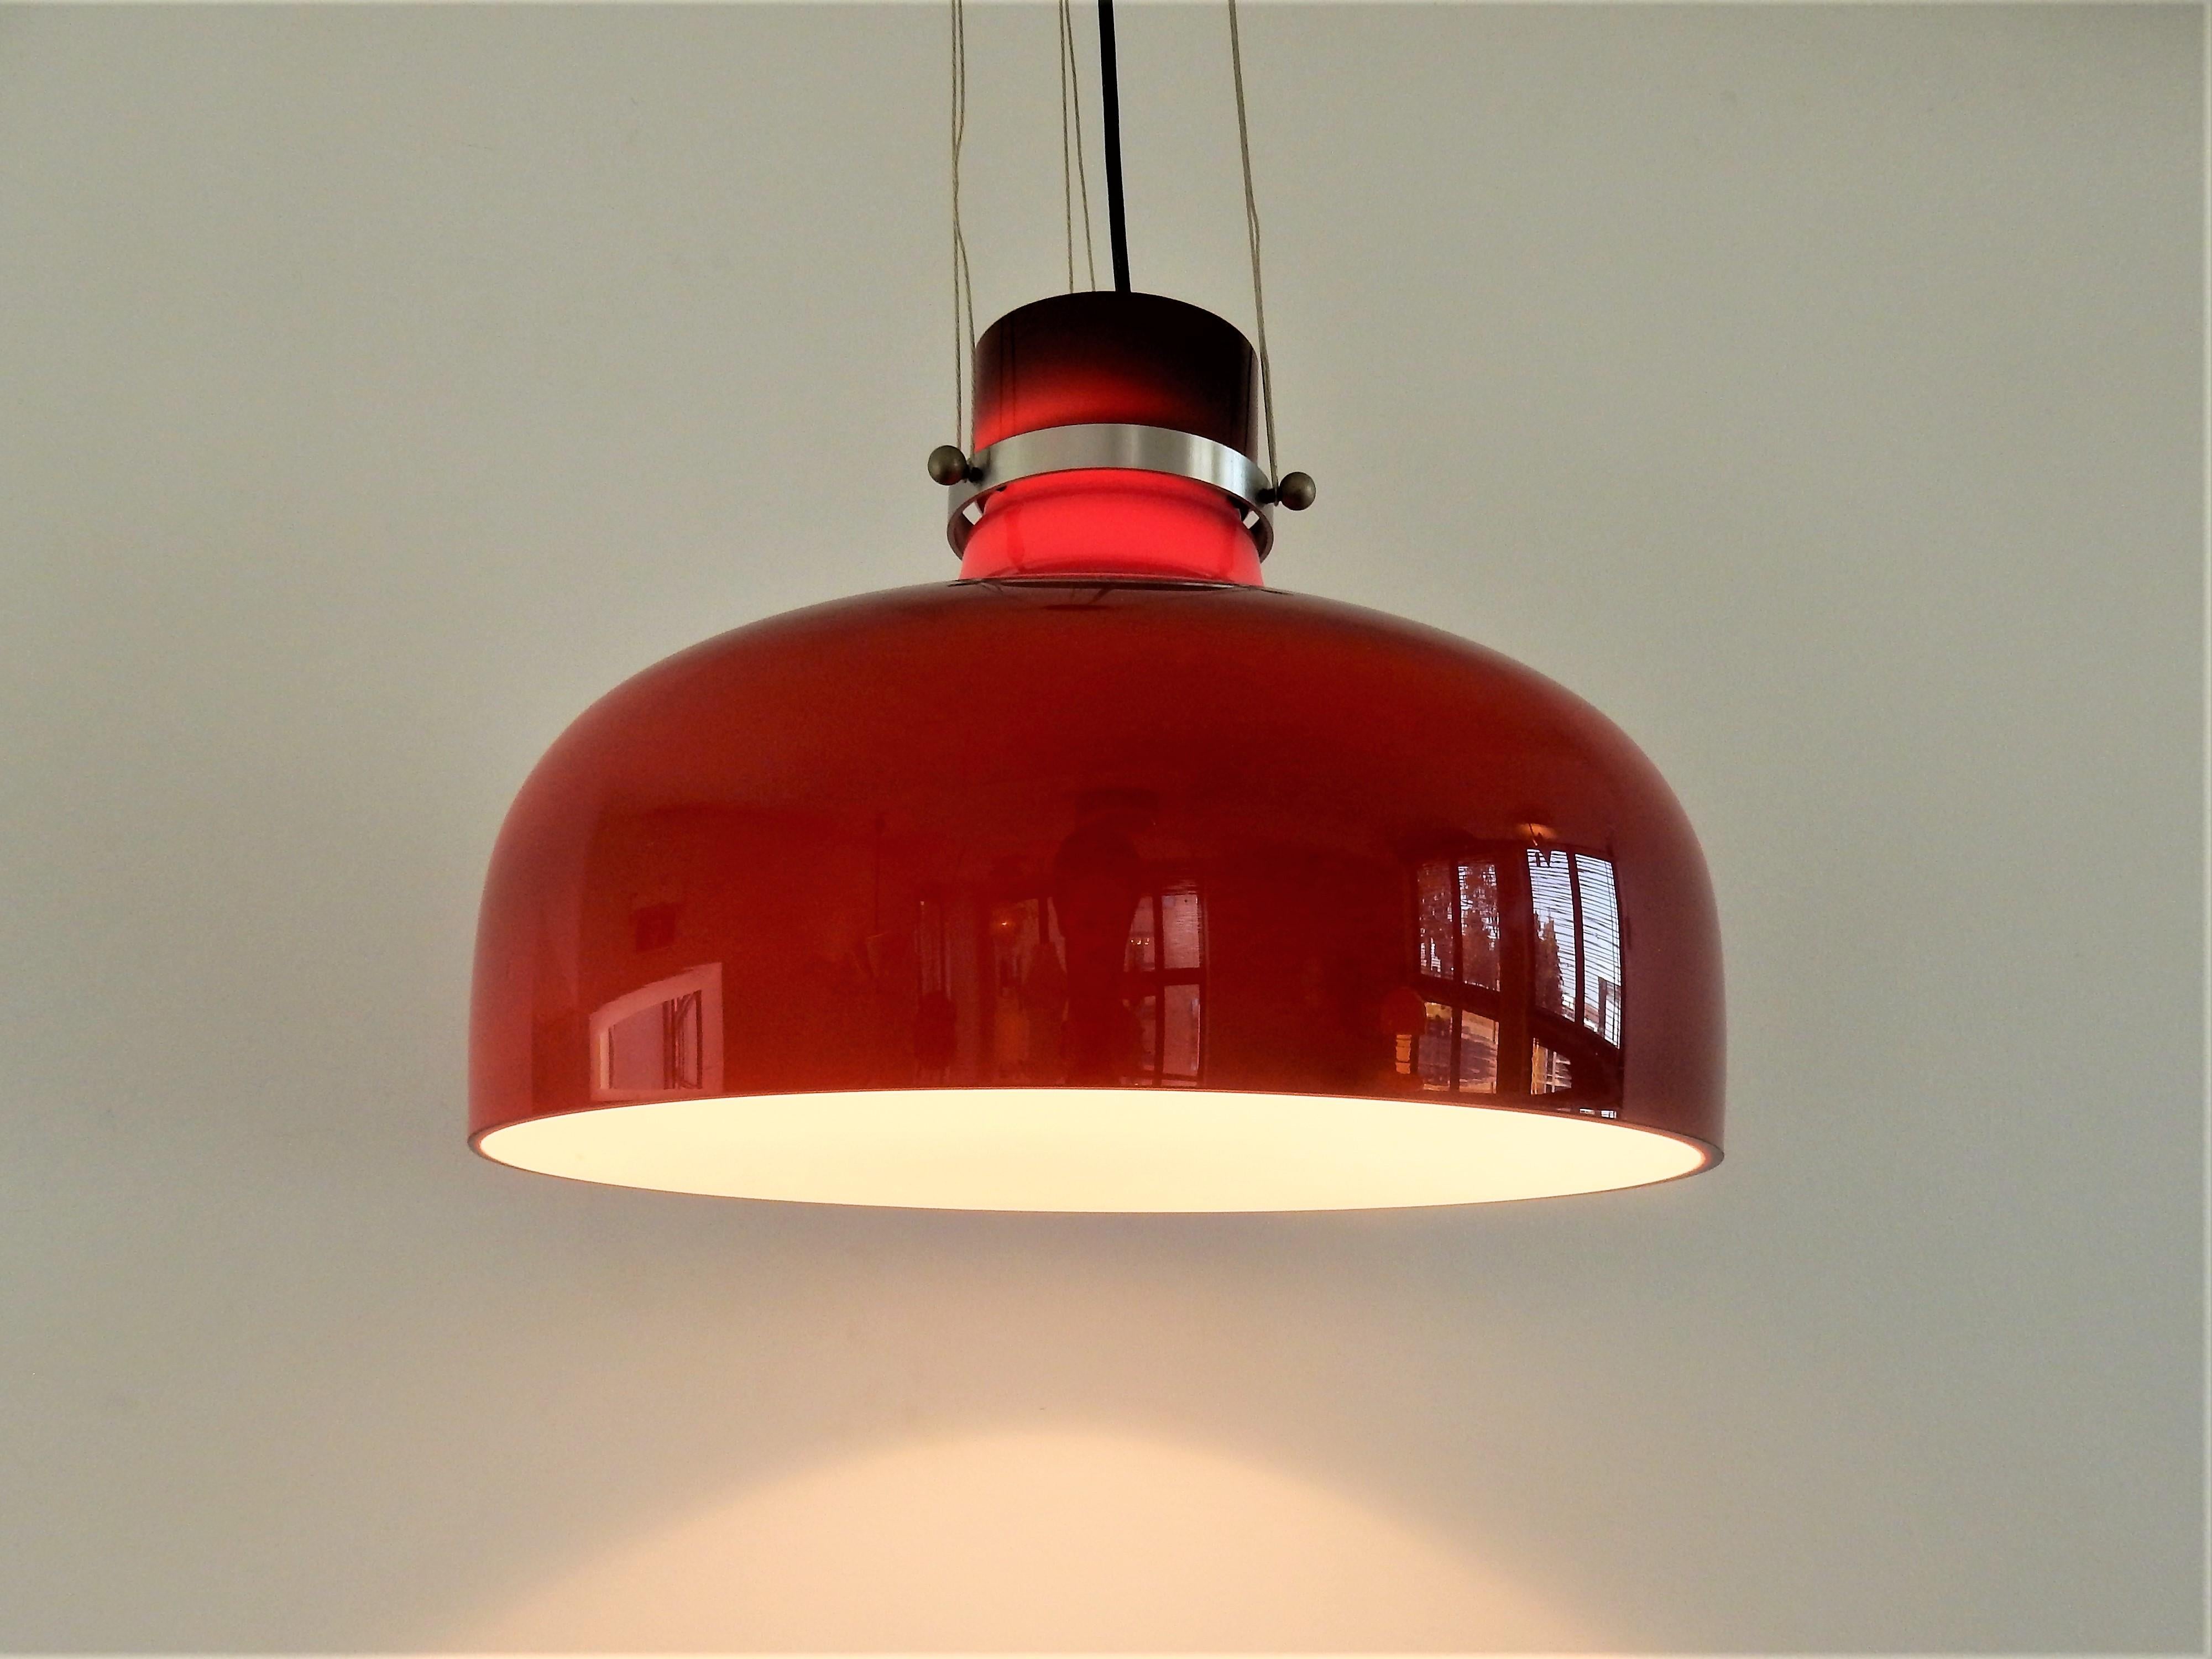 This large and very nice pendant lamp is made of red brown colored glass with a white inside and a clear glass outside. The glass is hung to the fixture by a metal ring with three connecting screws. This light is often attributed to Holmegaard. The